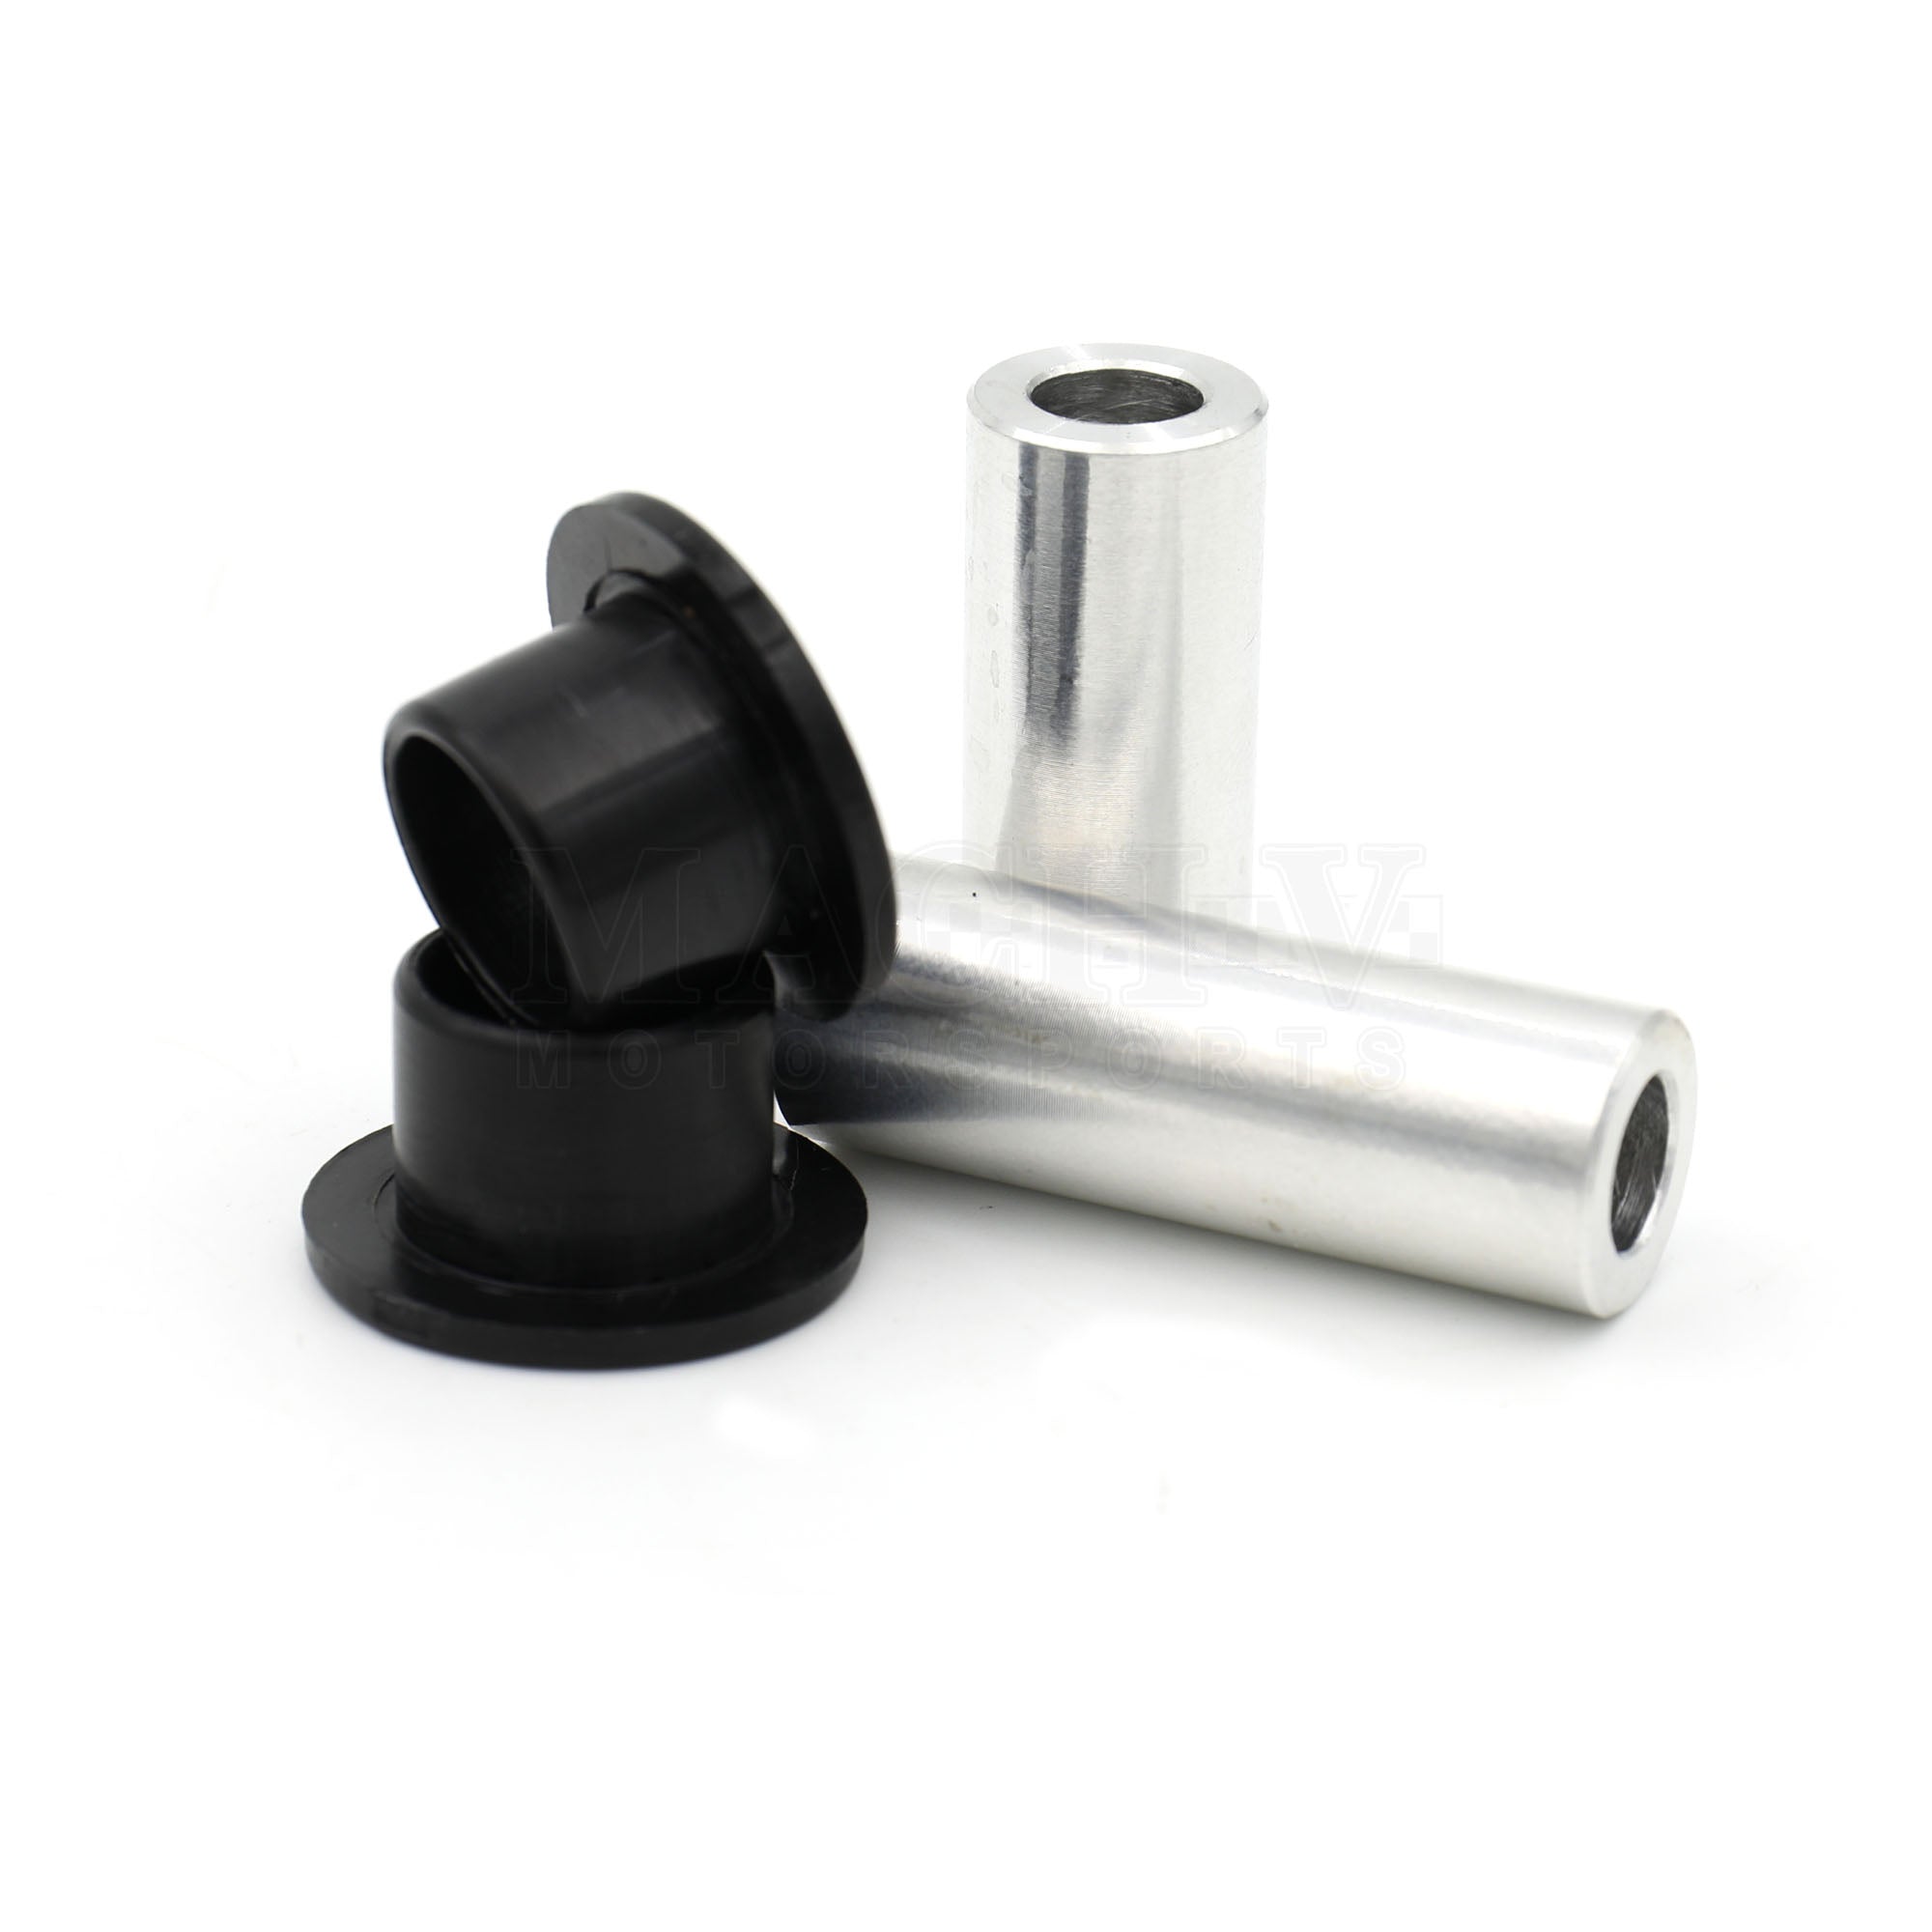 Turn In Concepts 5MT Lever Pivot Bushings